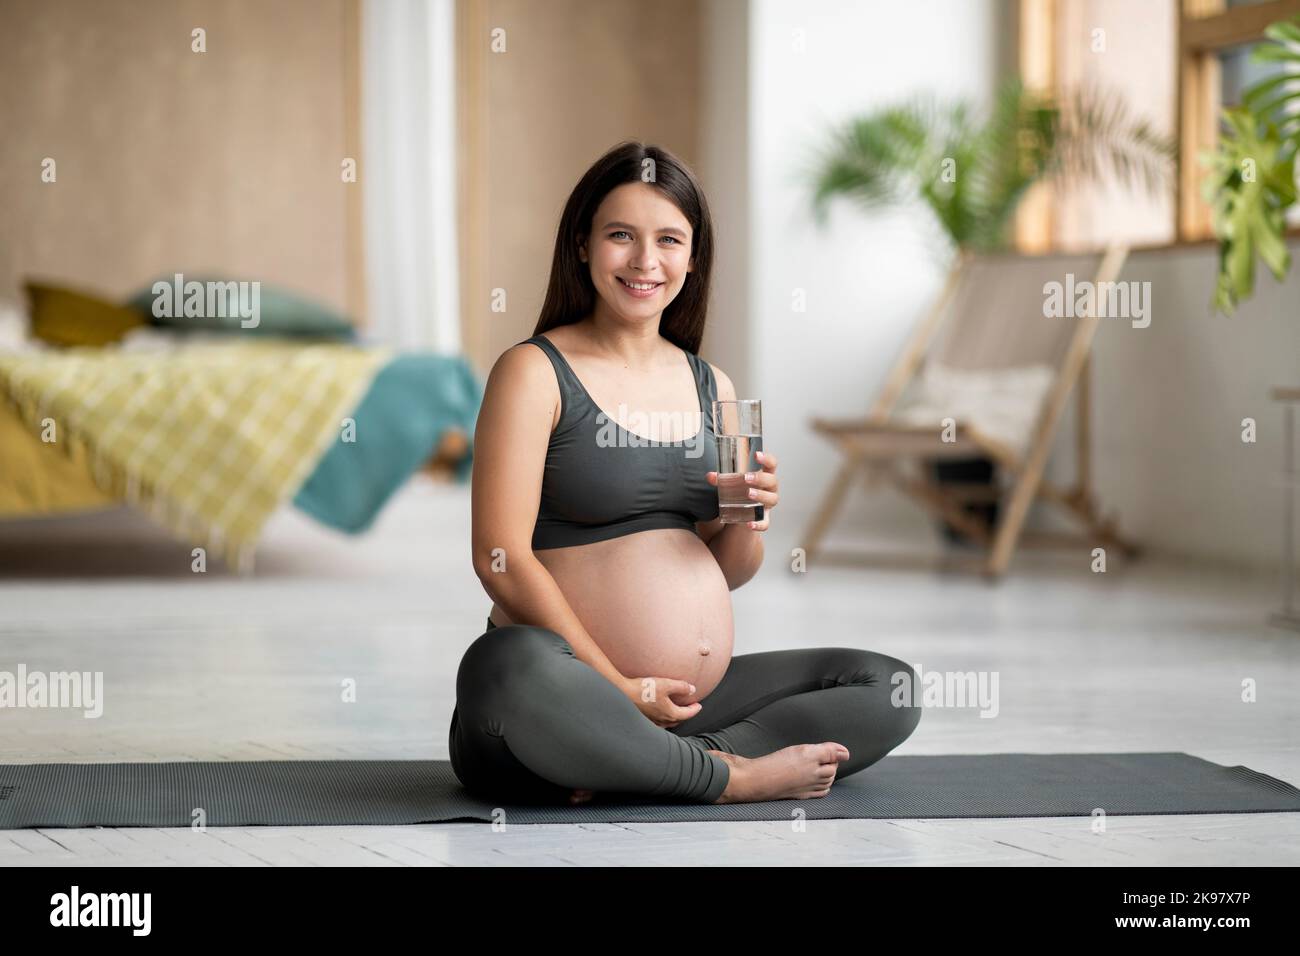 Young Pregnant Woman Sitting On Yoga Mat And Holding Glass With Water Stock Photo